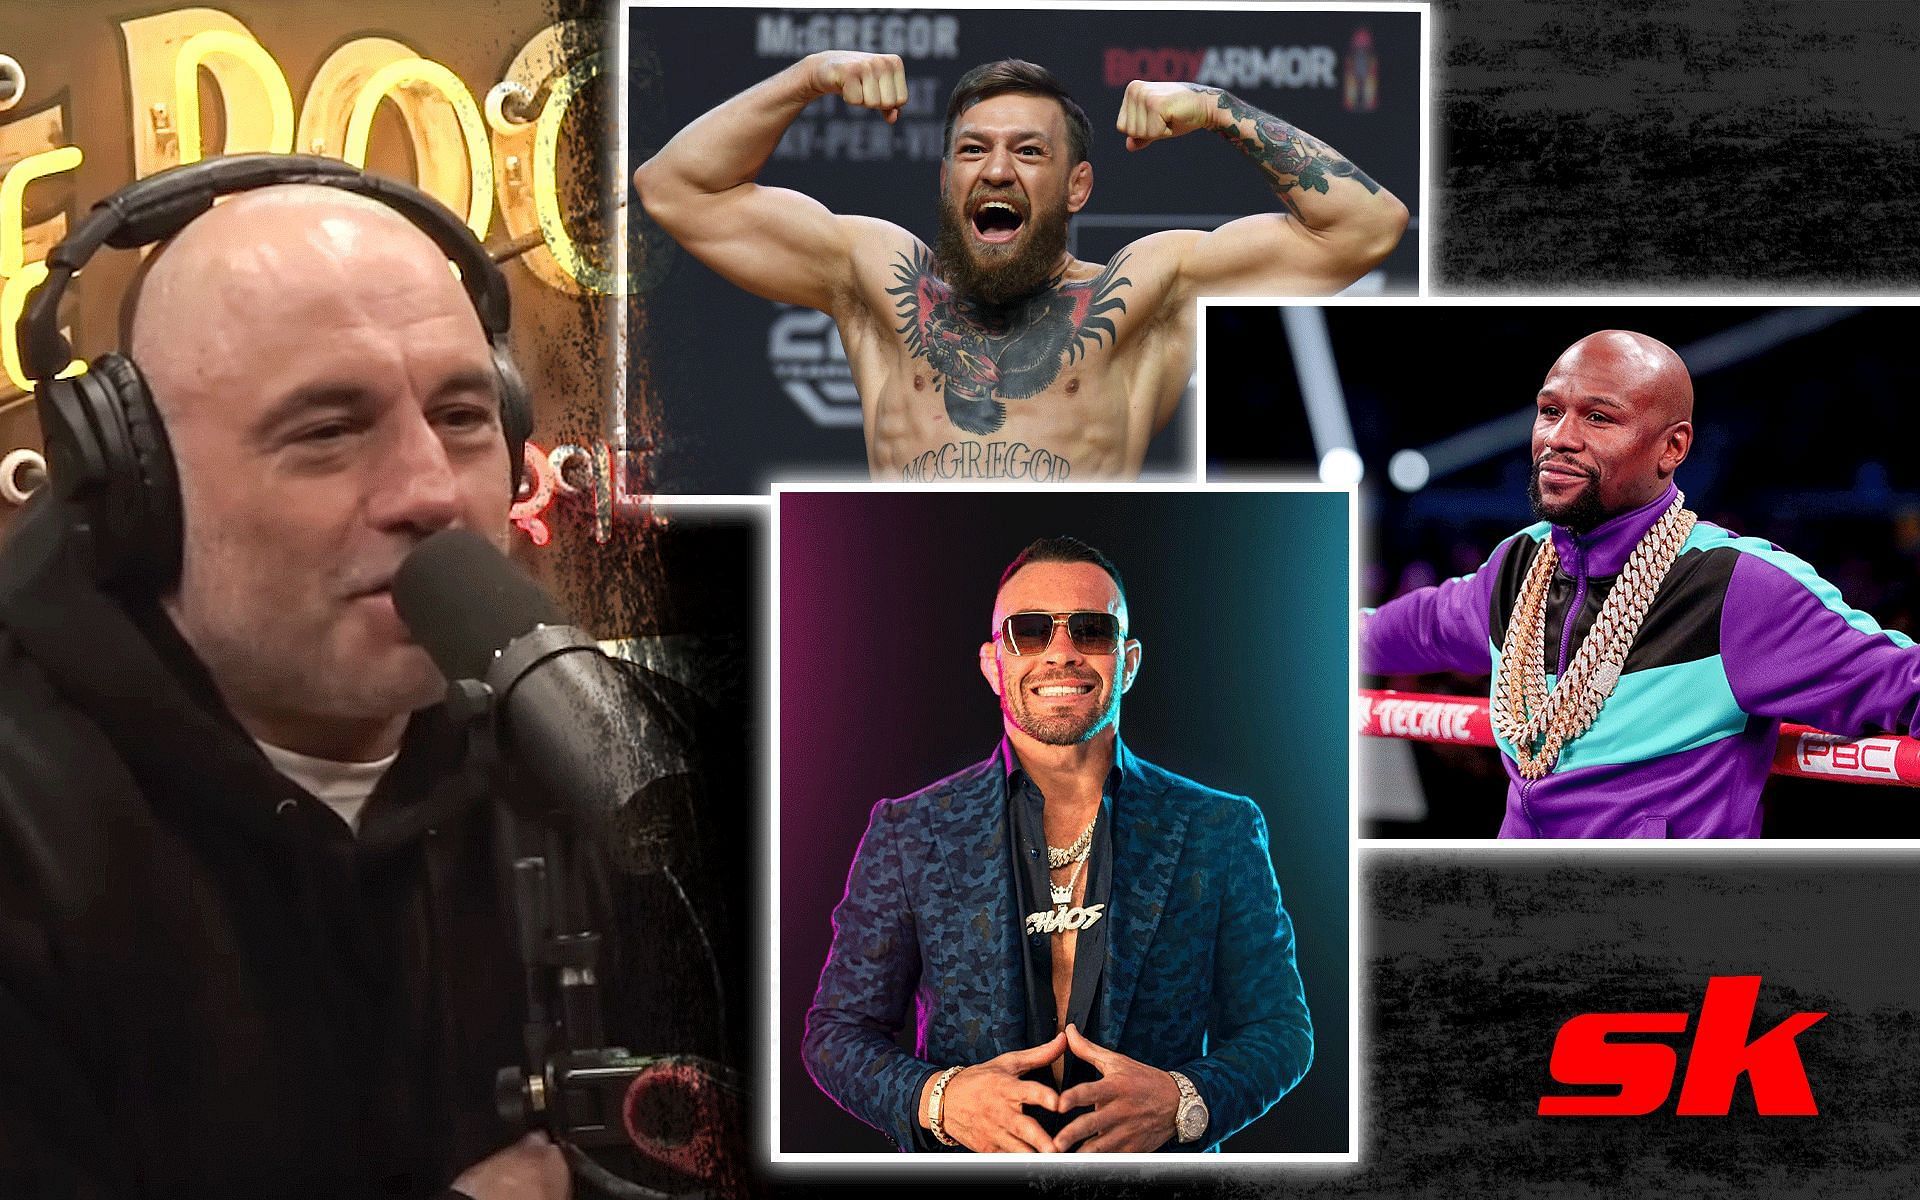 Joe Rogan (left)[Image courtesy: @powerfuljre on YouTube], Conor McGregor (middle top), Colby Covington (middle bottom)[Image courtesy: @colbycovmma] and Floyd Mayweather (right) 